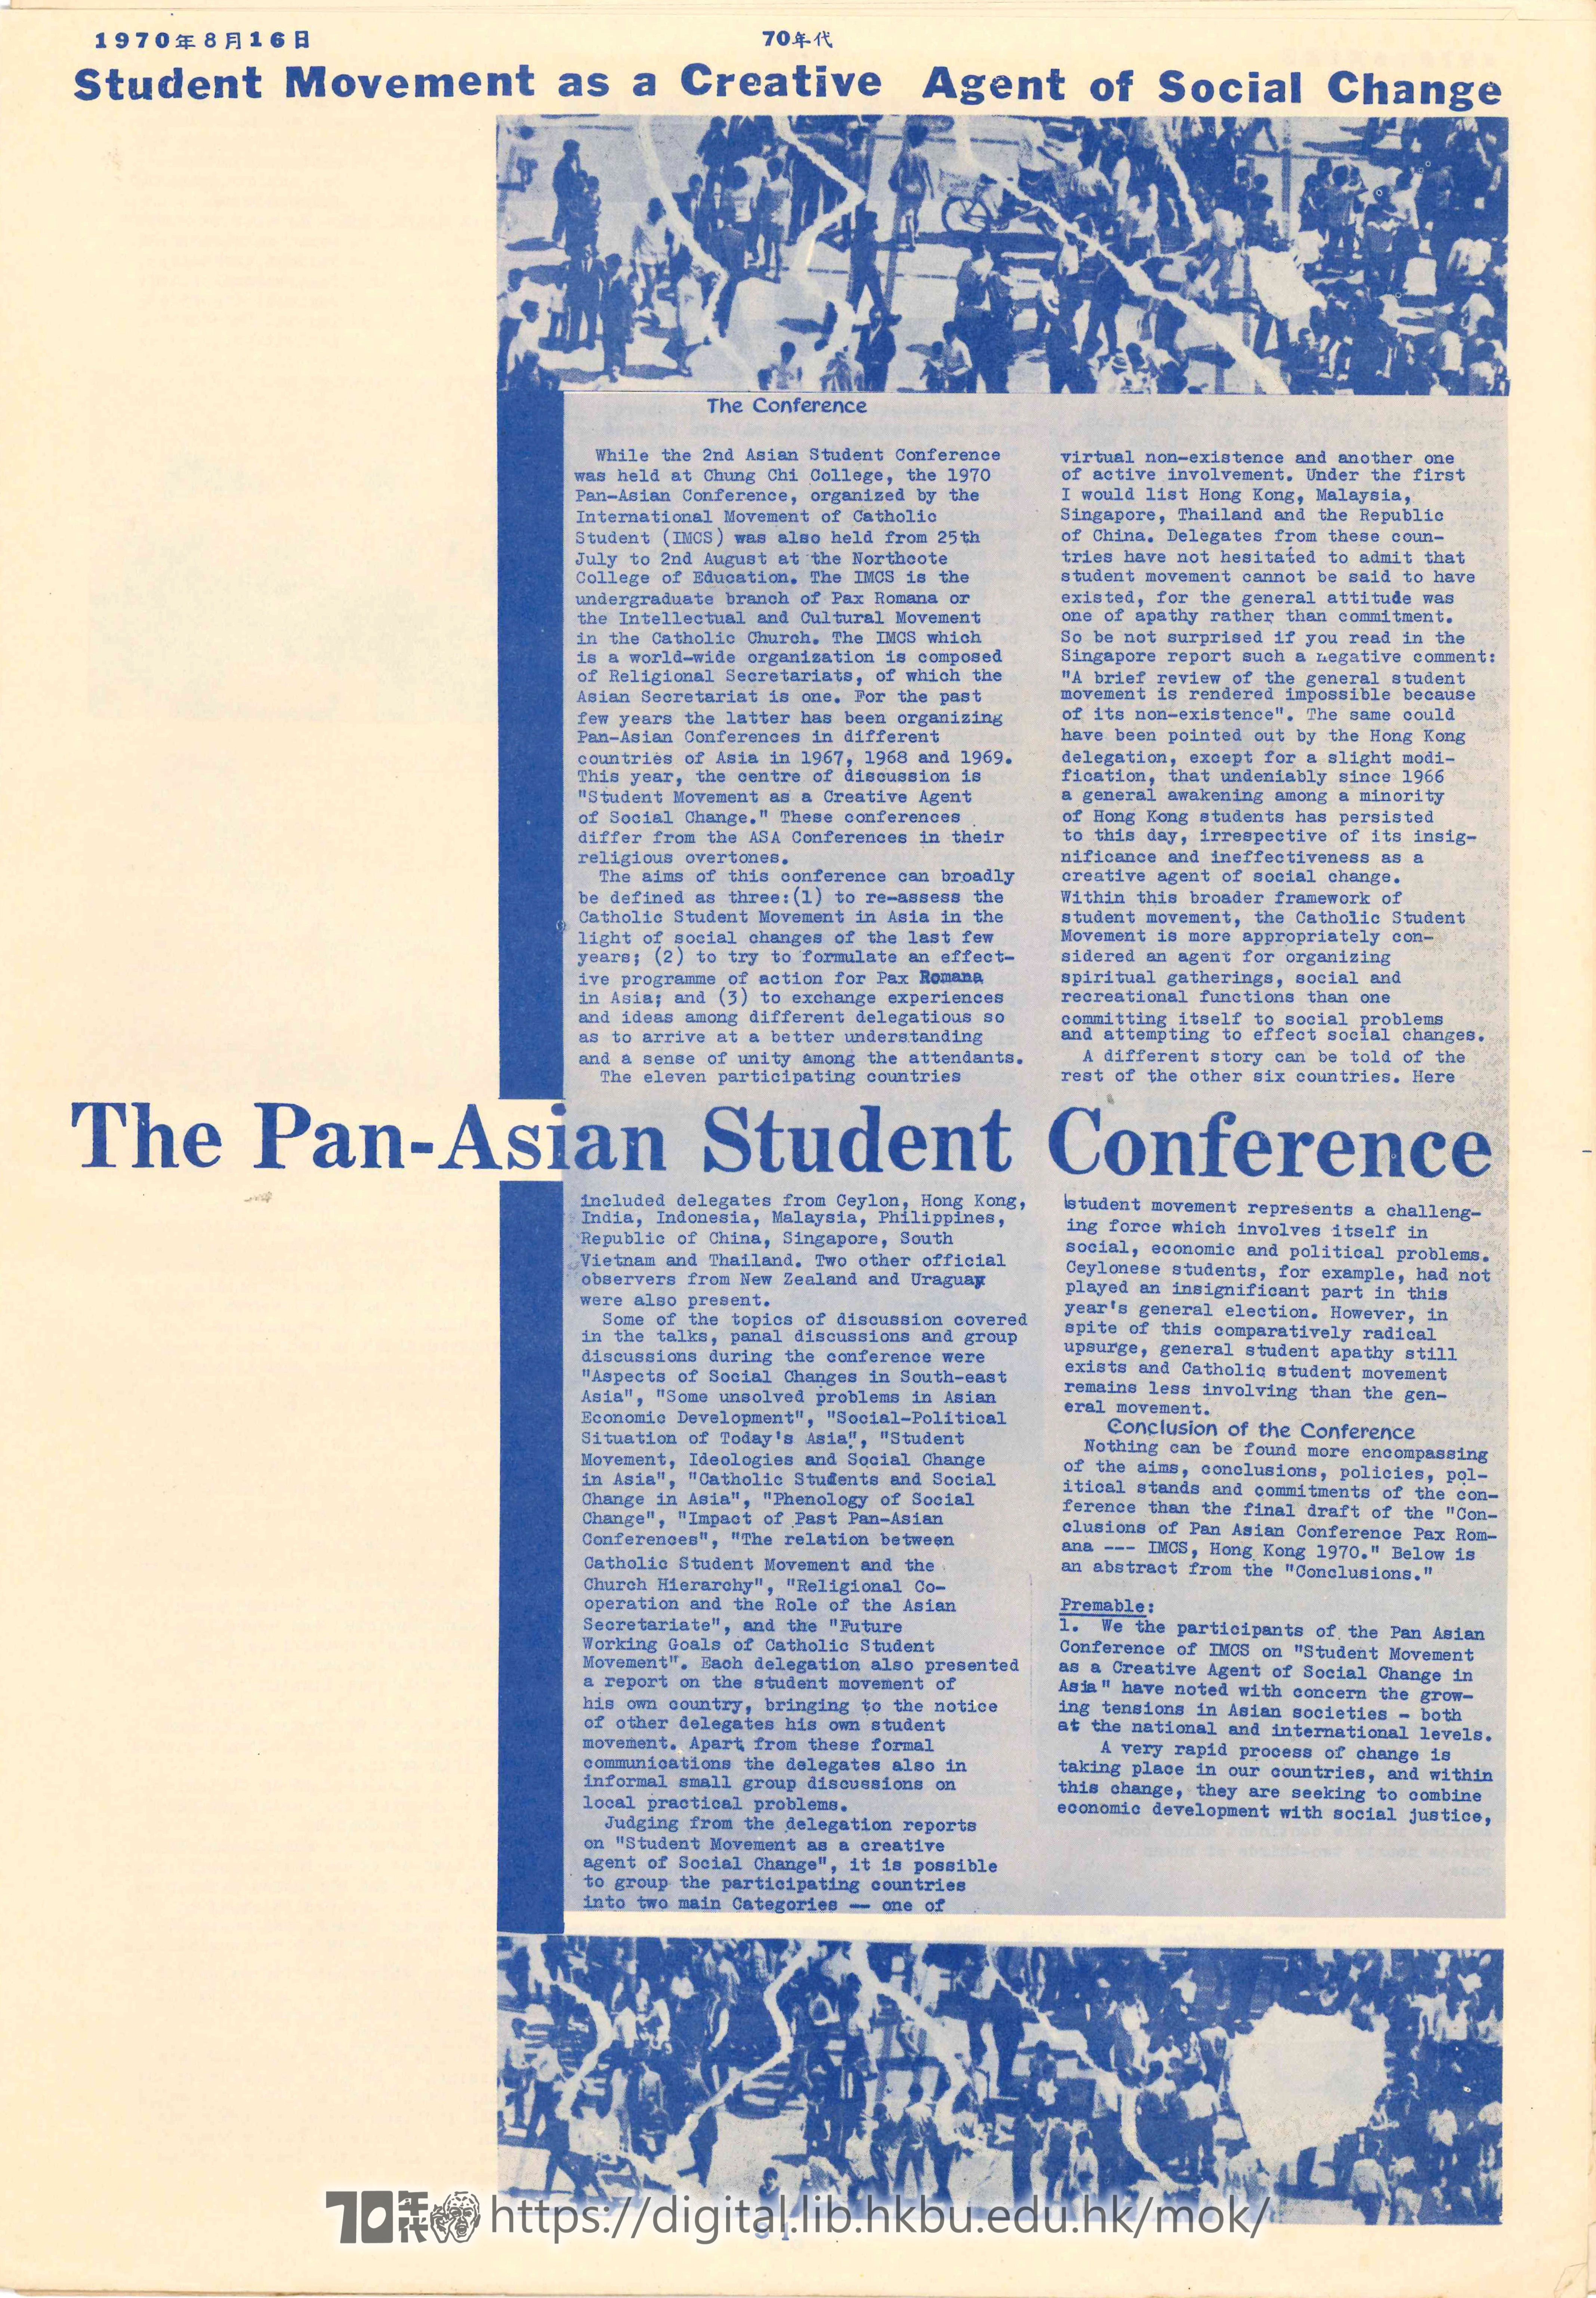  12 Student Movement as a Creative Agent of Social Change: The Pan-Asian Student Conference C.P.W. 